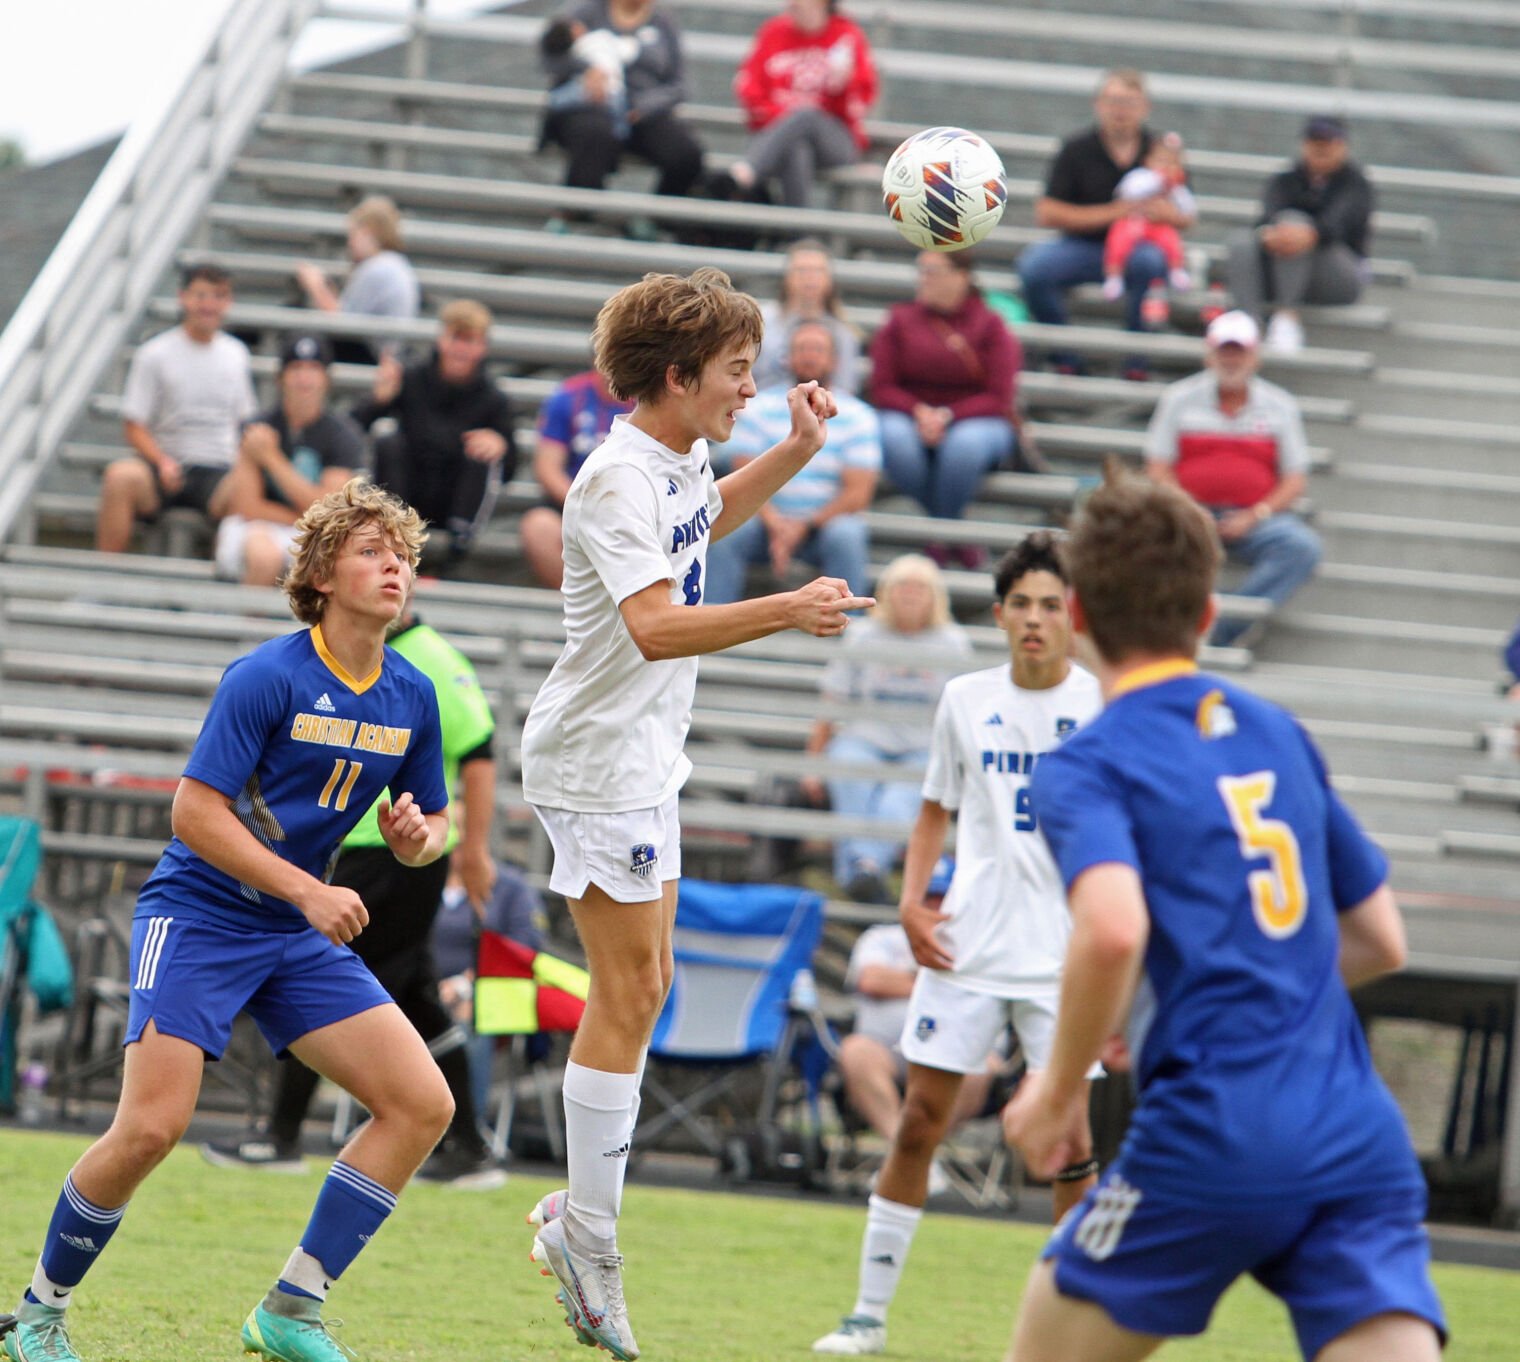 Charlestown dominates Christian Academy with a 4-0 victory in boys’ soccer match